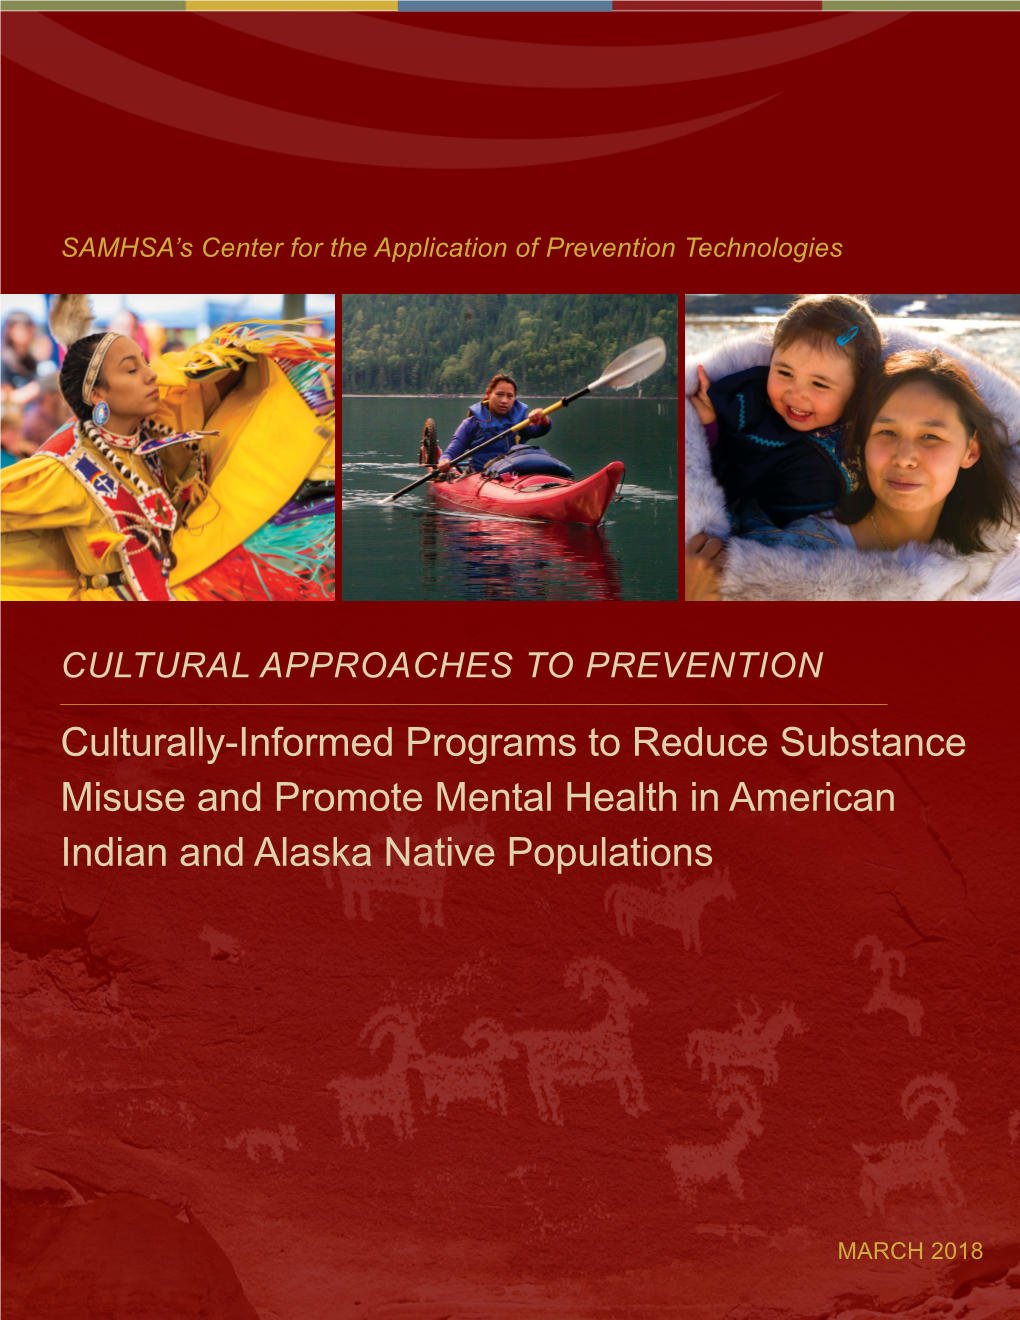 Culturally-Informed Programs to Reduce Substance Misuse and Promote Mental Health in American Indian and Alaska Native Populations